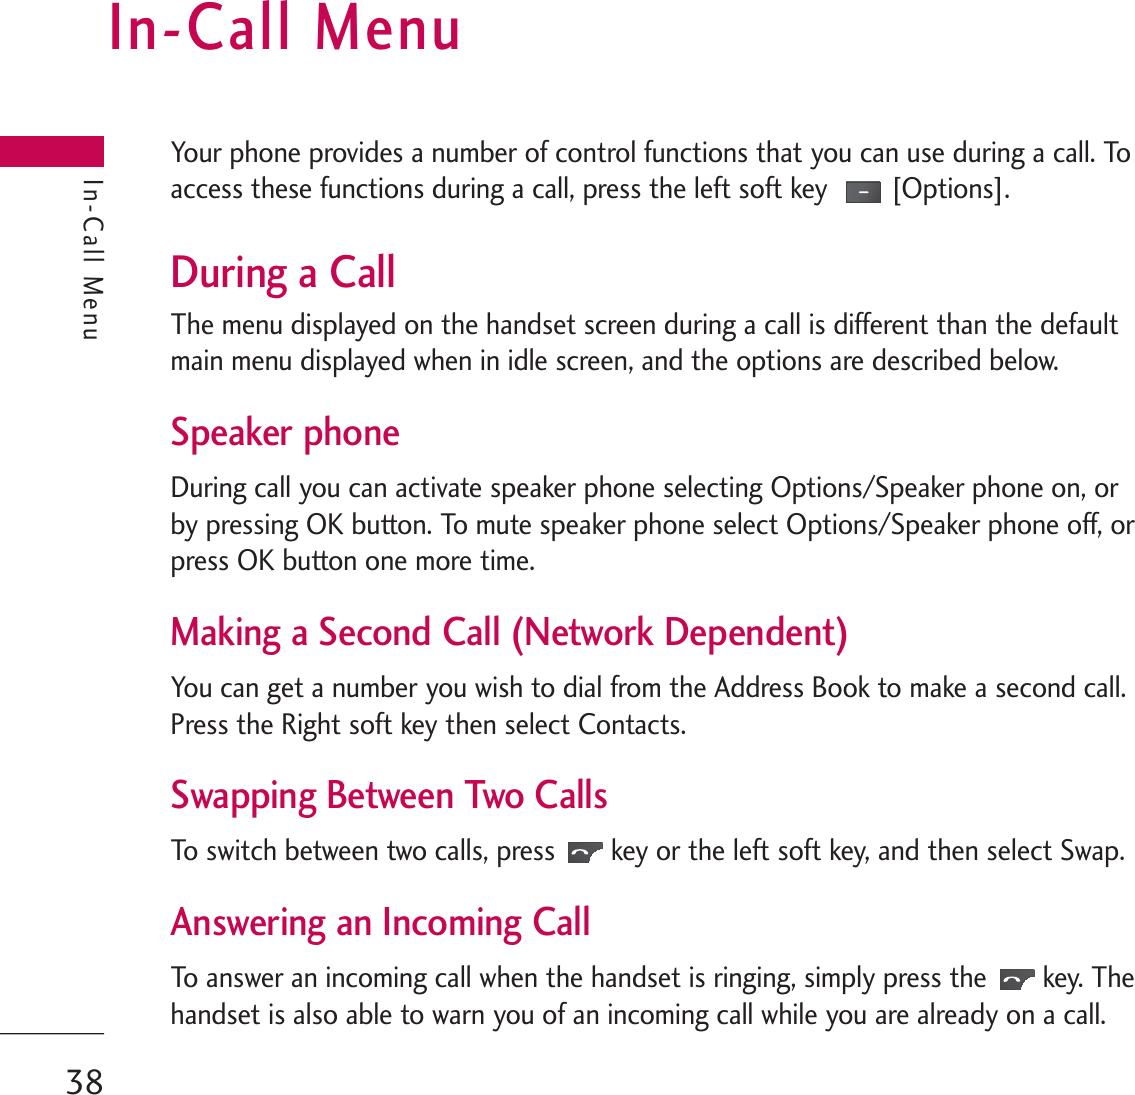 In-Call MenuYour phone provides a number of control functions that you can use during a call. Toaccess these functions during a call, press the left soft key  [Options].During a CallThe menu displayed on the handset screen during a call is different than the defaultmain menu displayed when in idle screen, and the options are described below.Speaker phoneDuring call you can activate speaker phone selecting Options/Speaker phone on, orby pressing OK button. To mute speaker phone select Options/Speaker phone off, orpress OK button one more time.Making a Second Call (Network Dependent)You can get a number you wish to dial from the Address Book to make a second call.Press the Right soft key then select Contacts.Swapping Between Two CallsTo switch between two calls, press key or the left soft key, and then select Swap. Answering an Incoming Call To answer an incoming call when the handset is ringing, simply press the key. Thehandset is also able to warn you of an incoming call while you are already on a call. In-Call Menu38